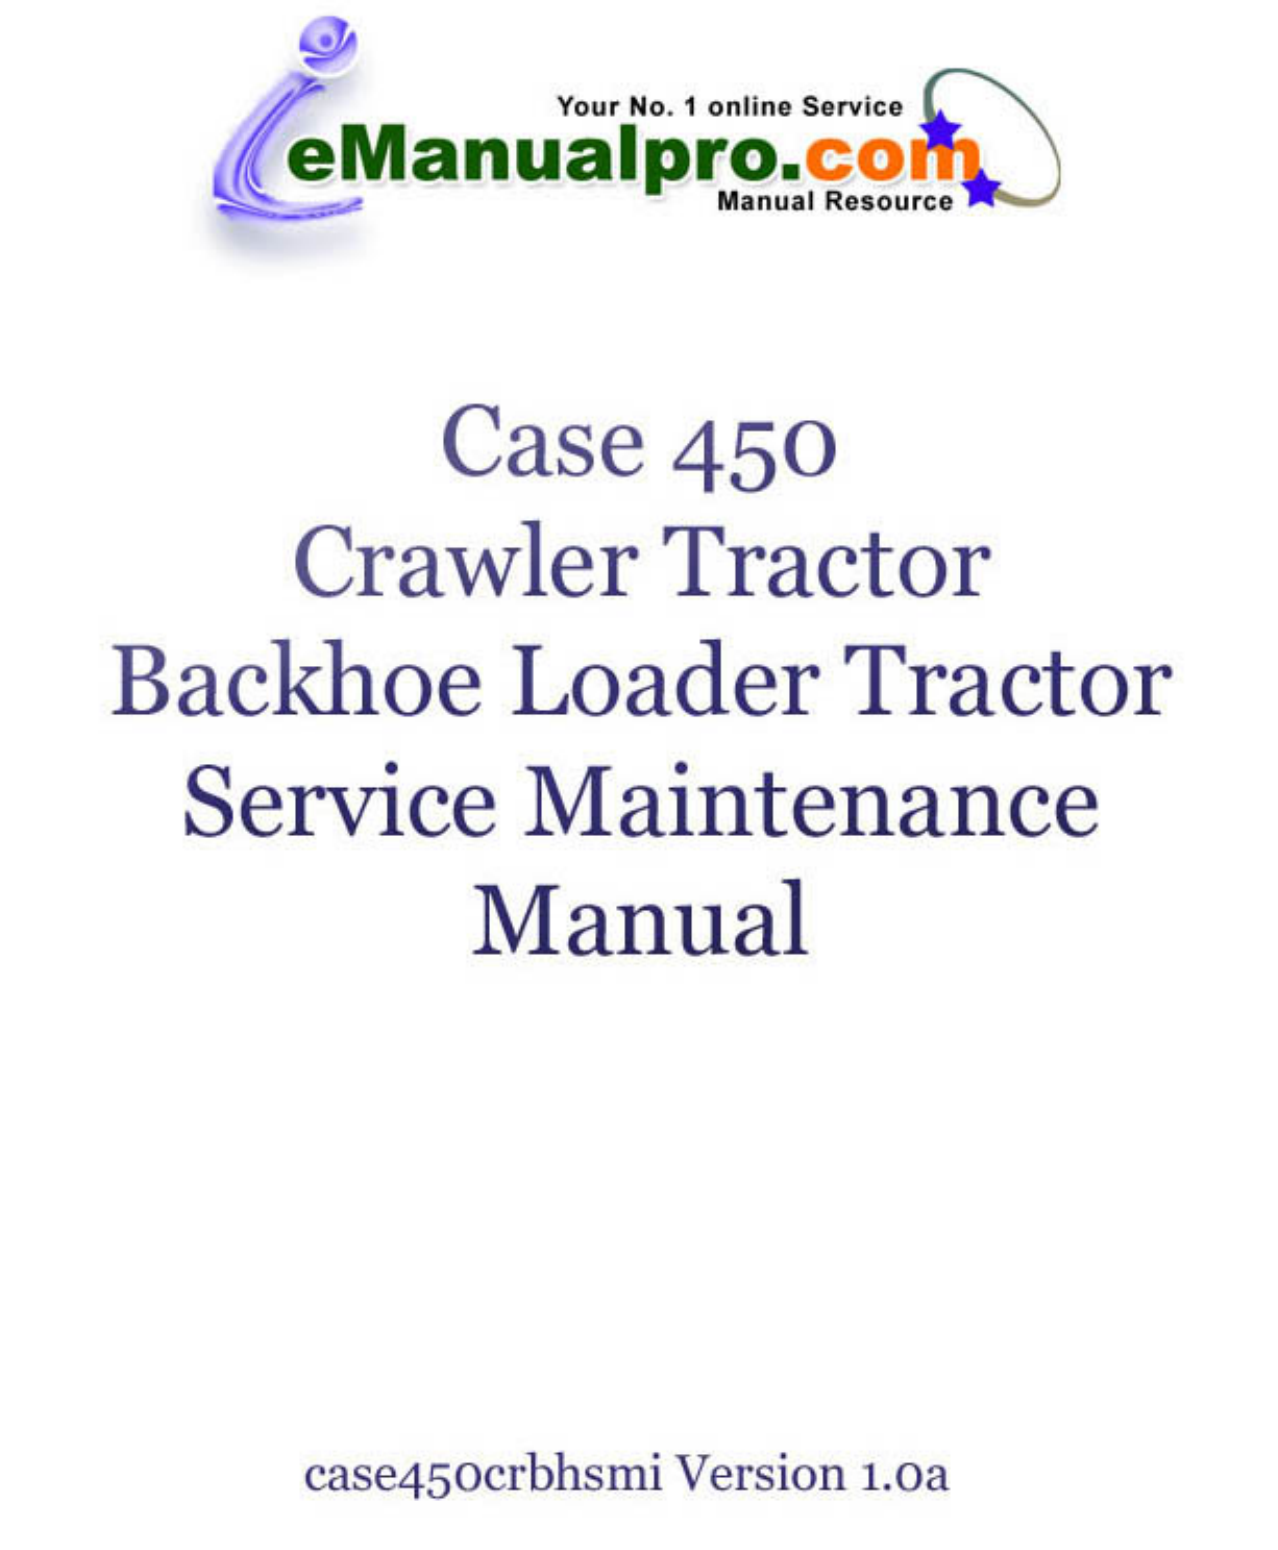 Case 450 tractor service manual Preview image 1